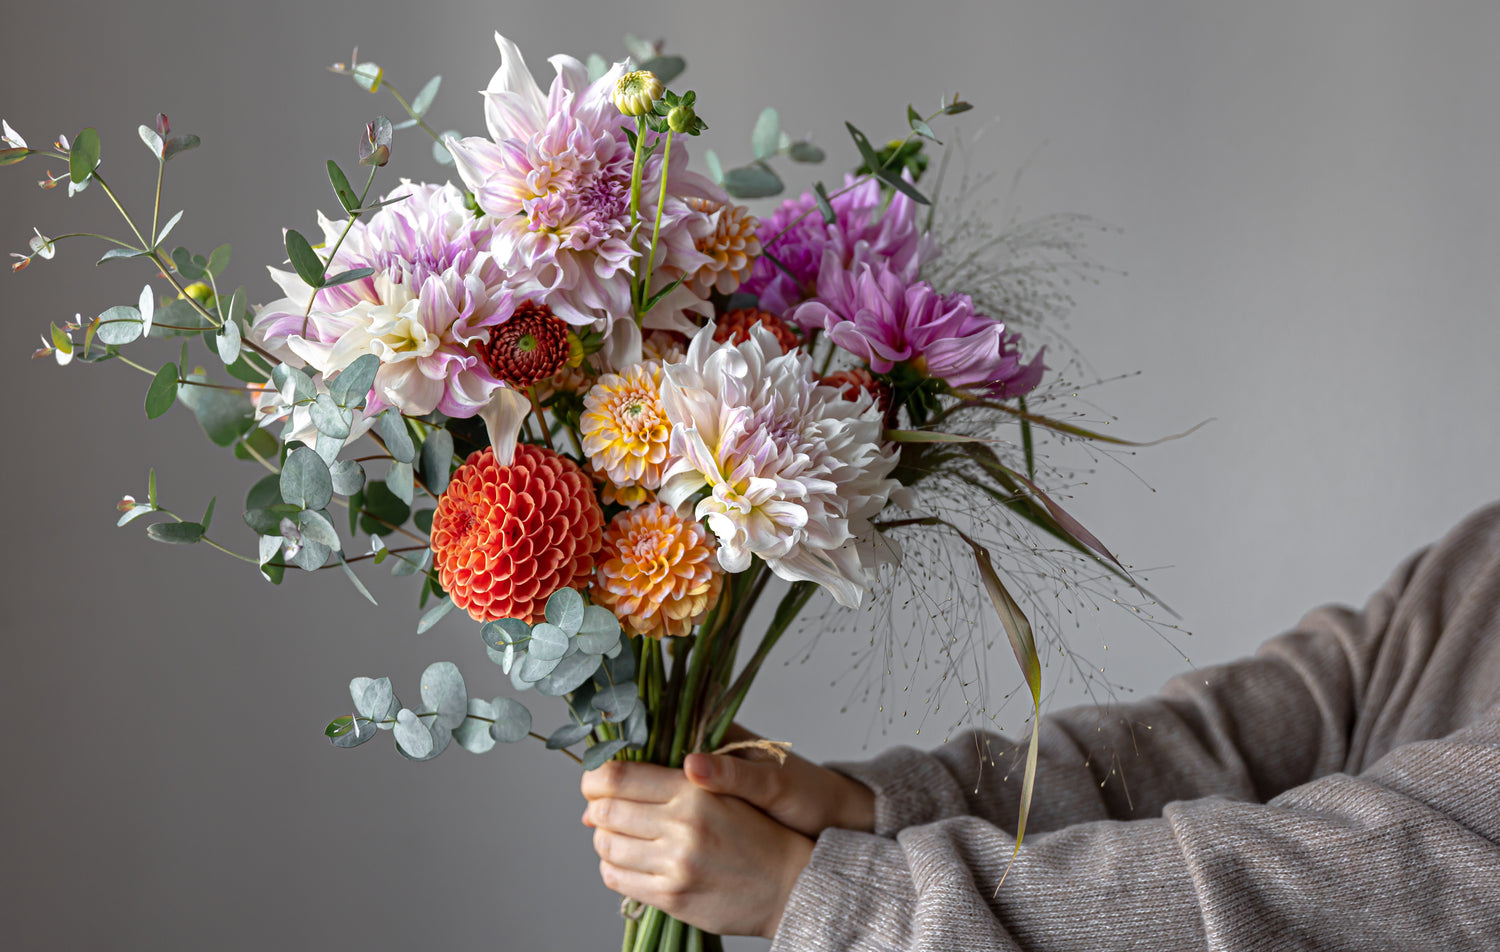 Florist holding a bouquet of pink and orange dahlias with eucalyptus accents